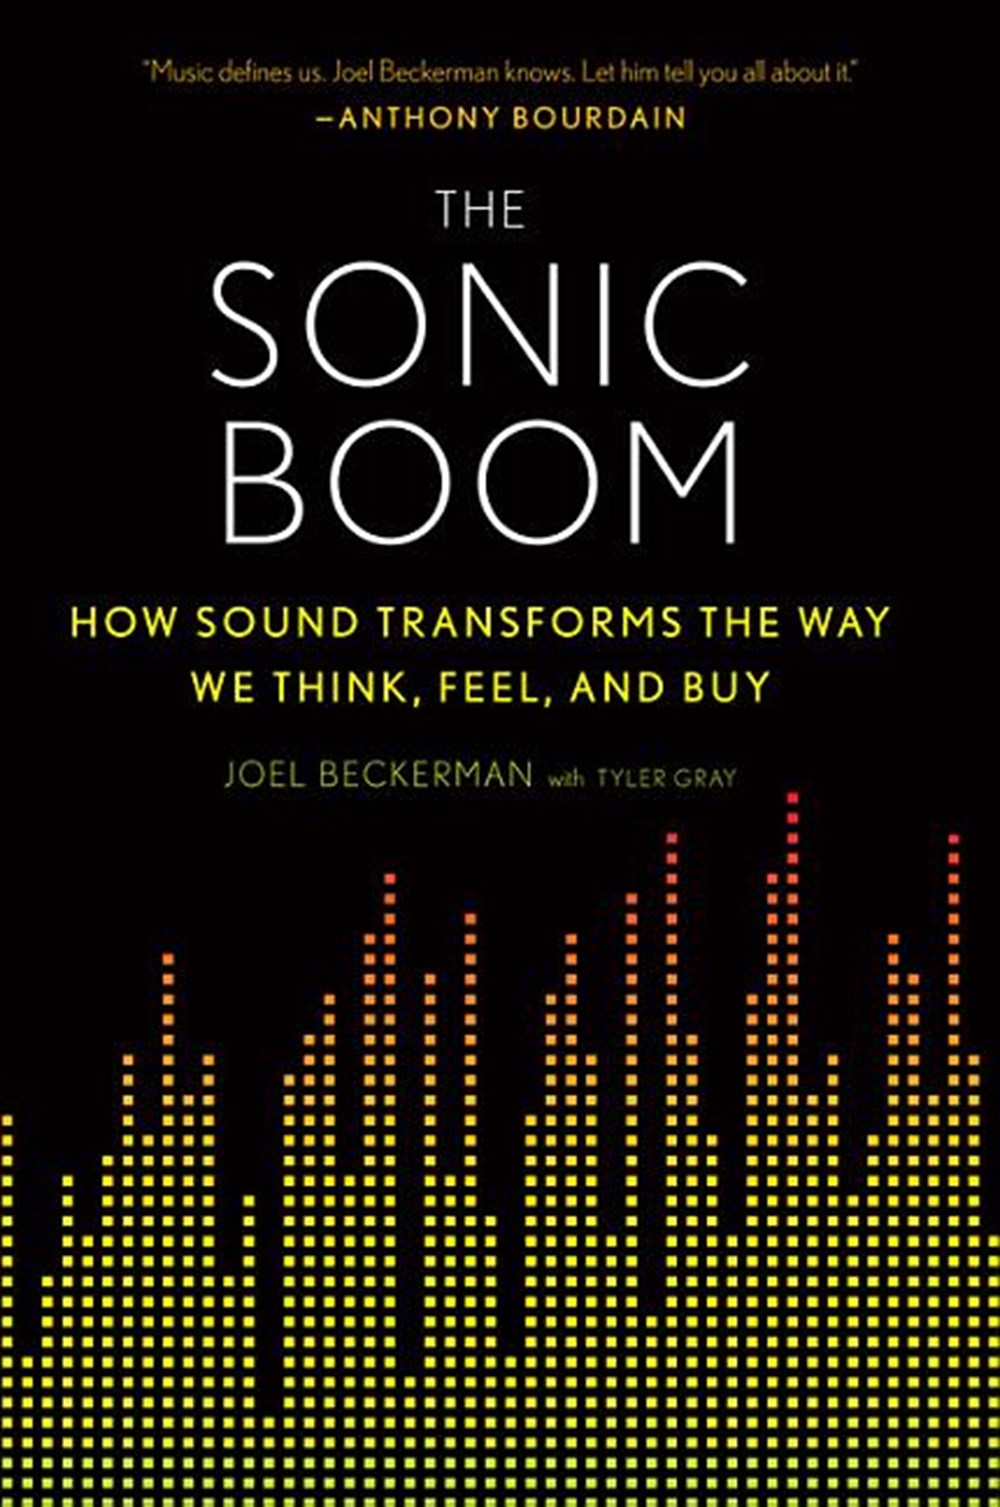 Sonic Boom How Sound Transforms the Way We Think, Feel, and Buy